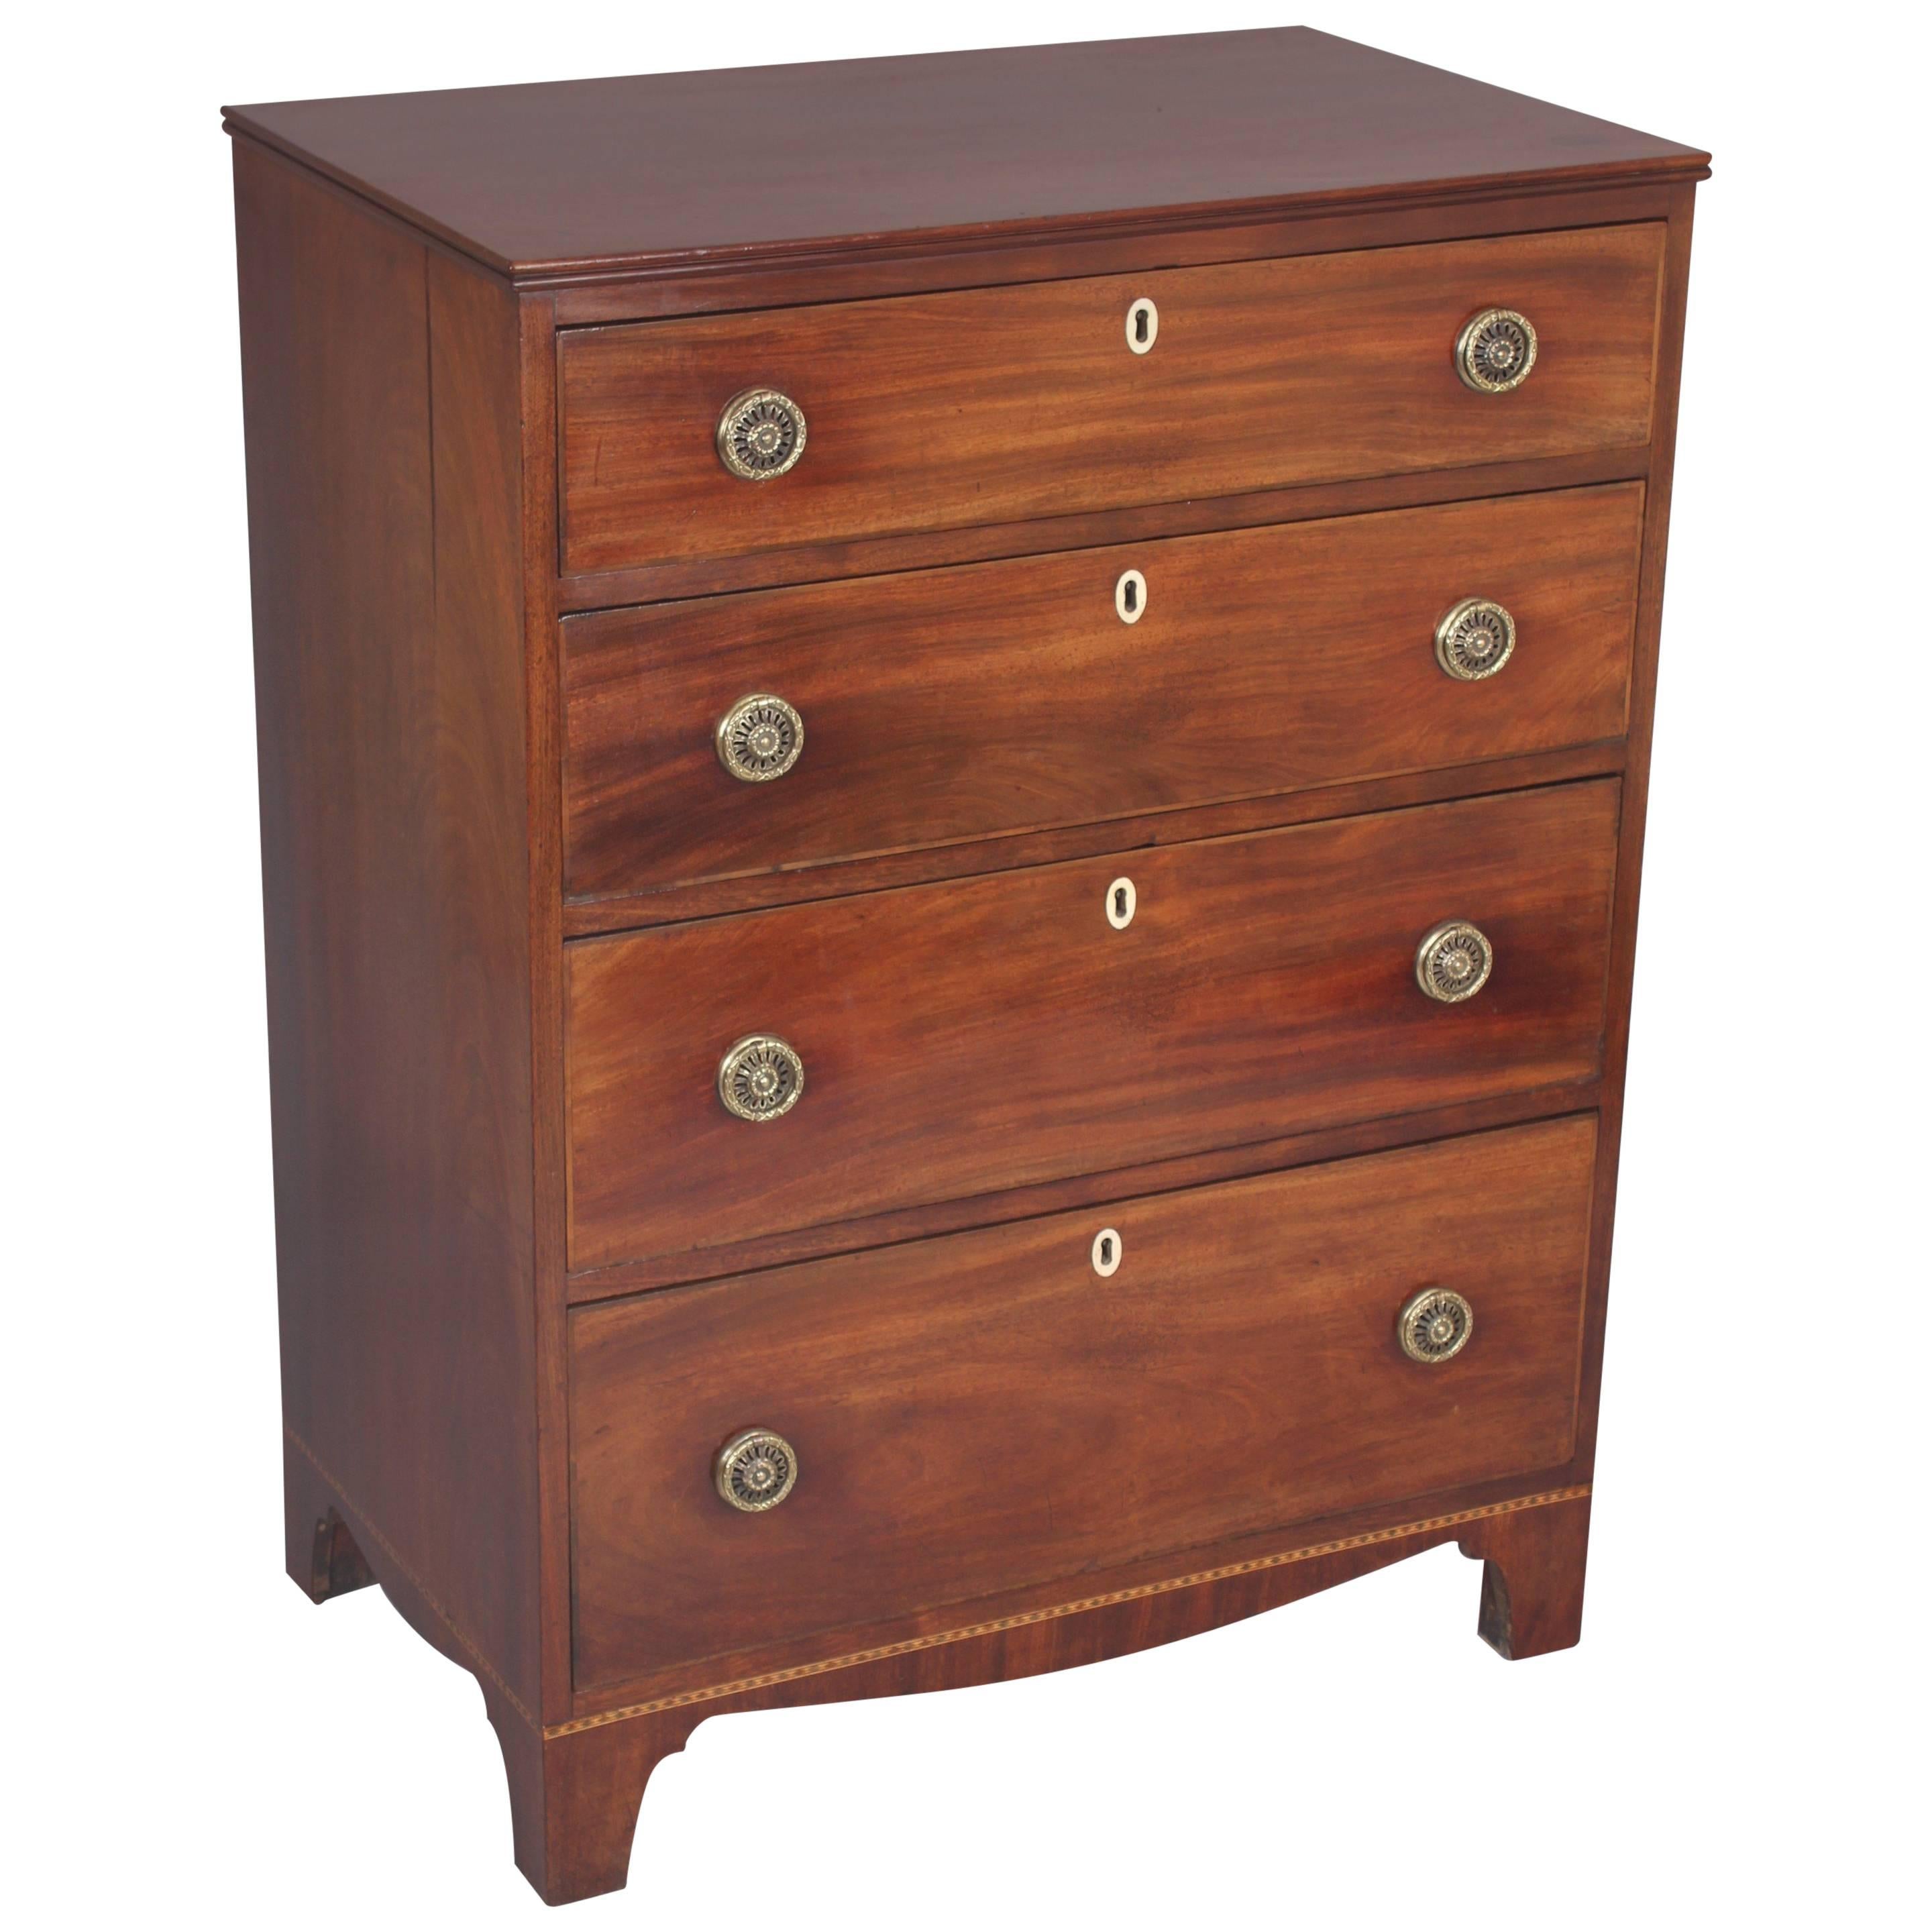 George III Period Mahogany Chest-of-drawers of Narrow Proportions